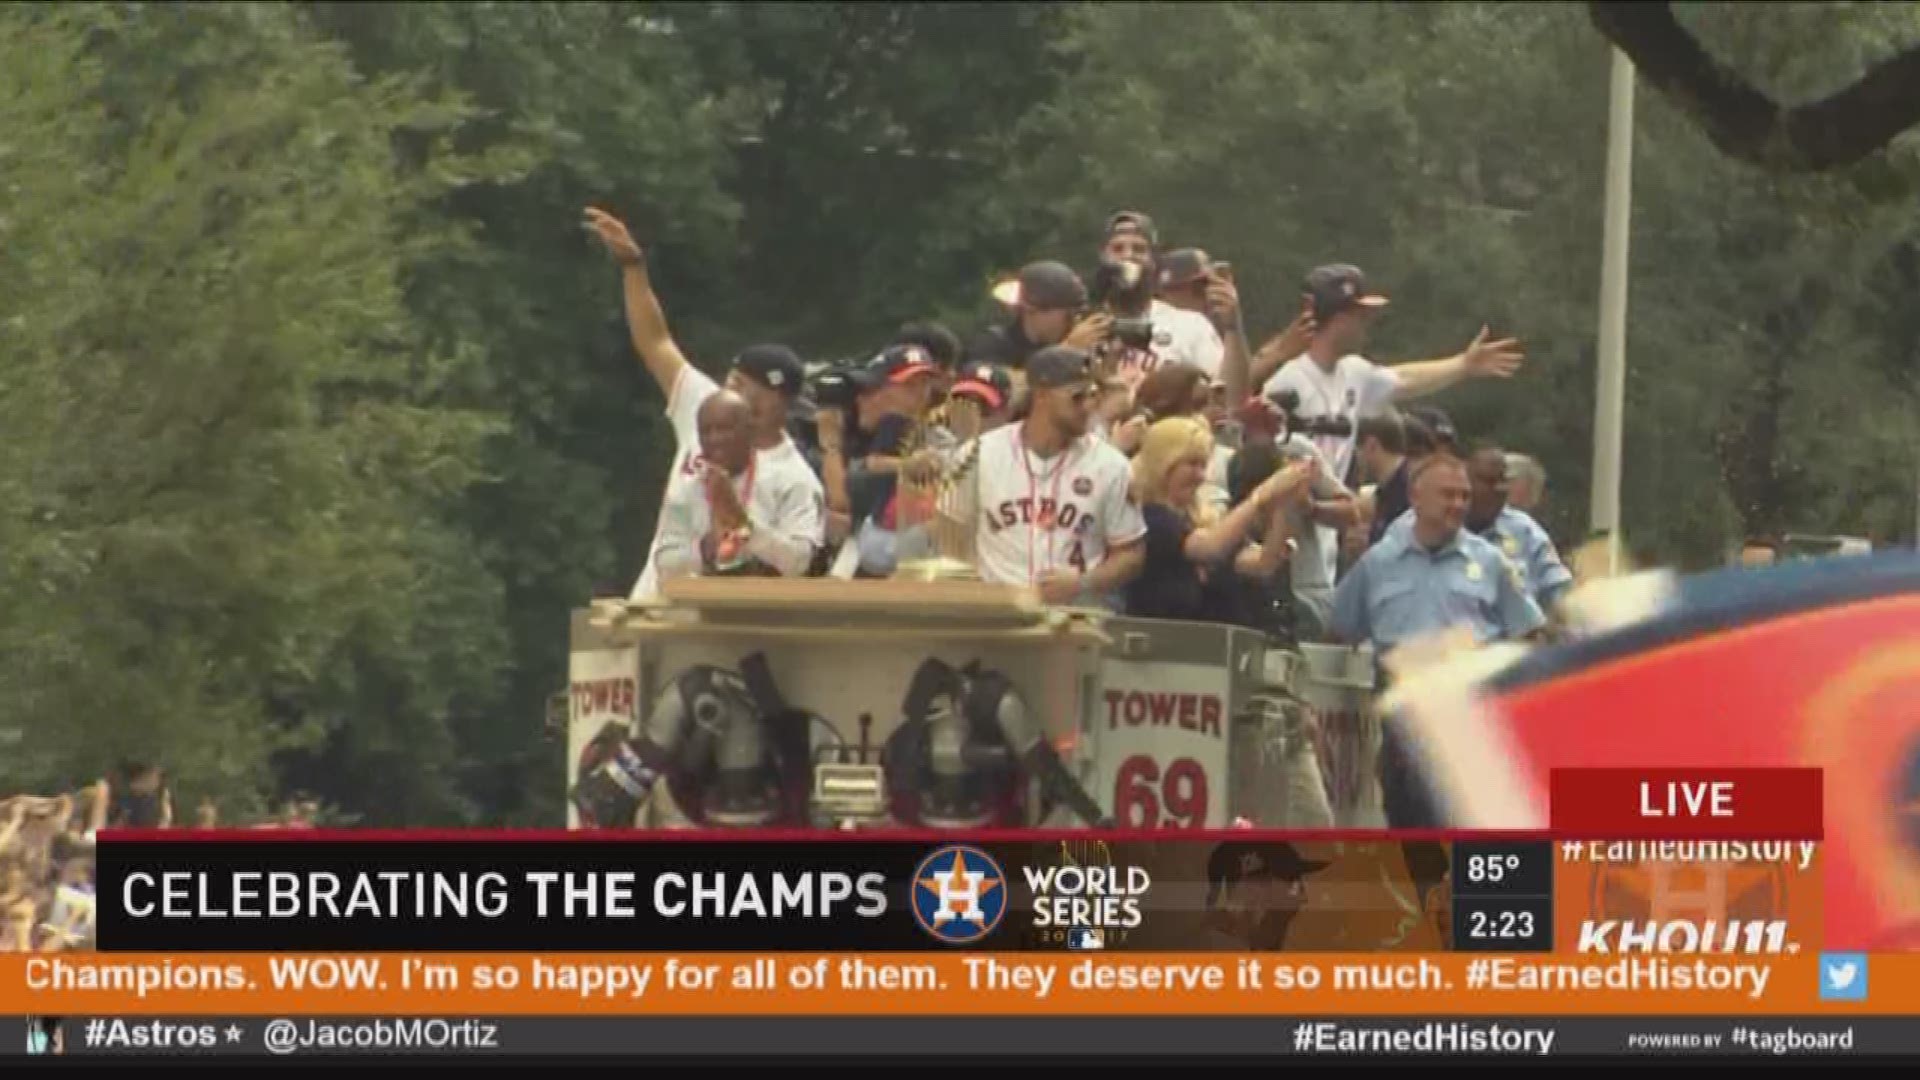 The Houston Astros World Series Championship Parade has officially begun and the players are waving to the fans.